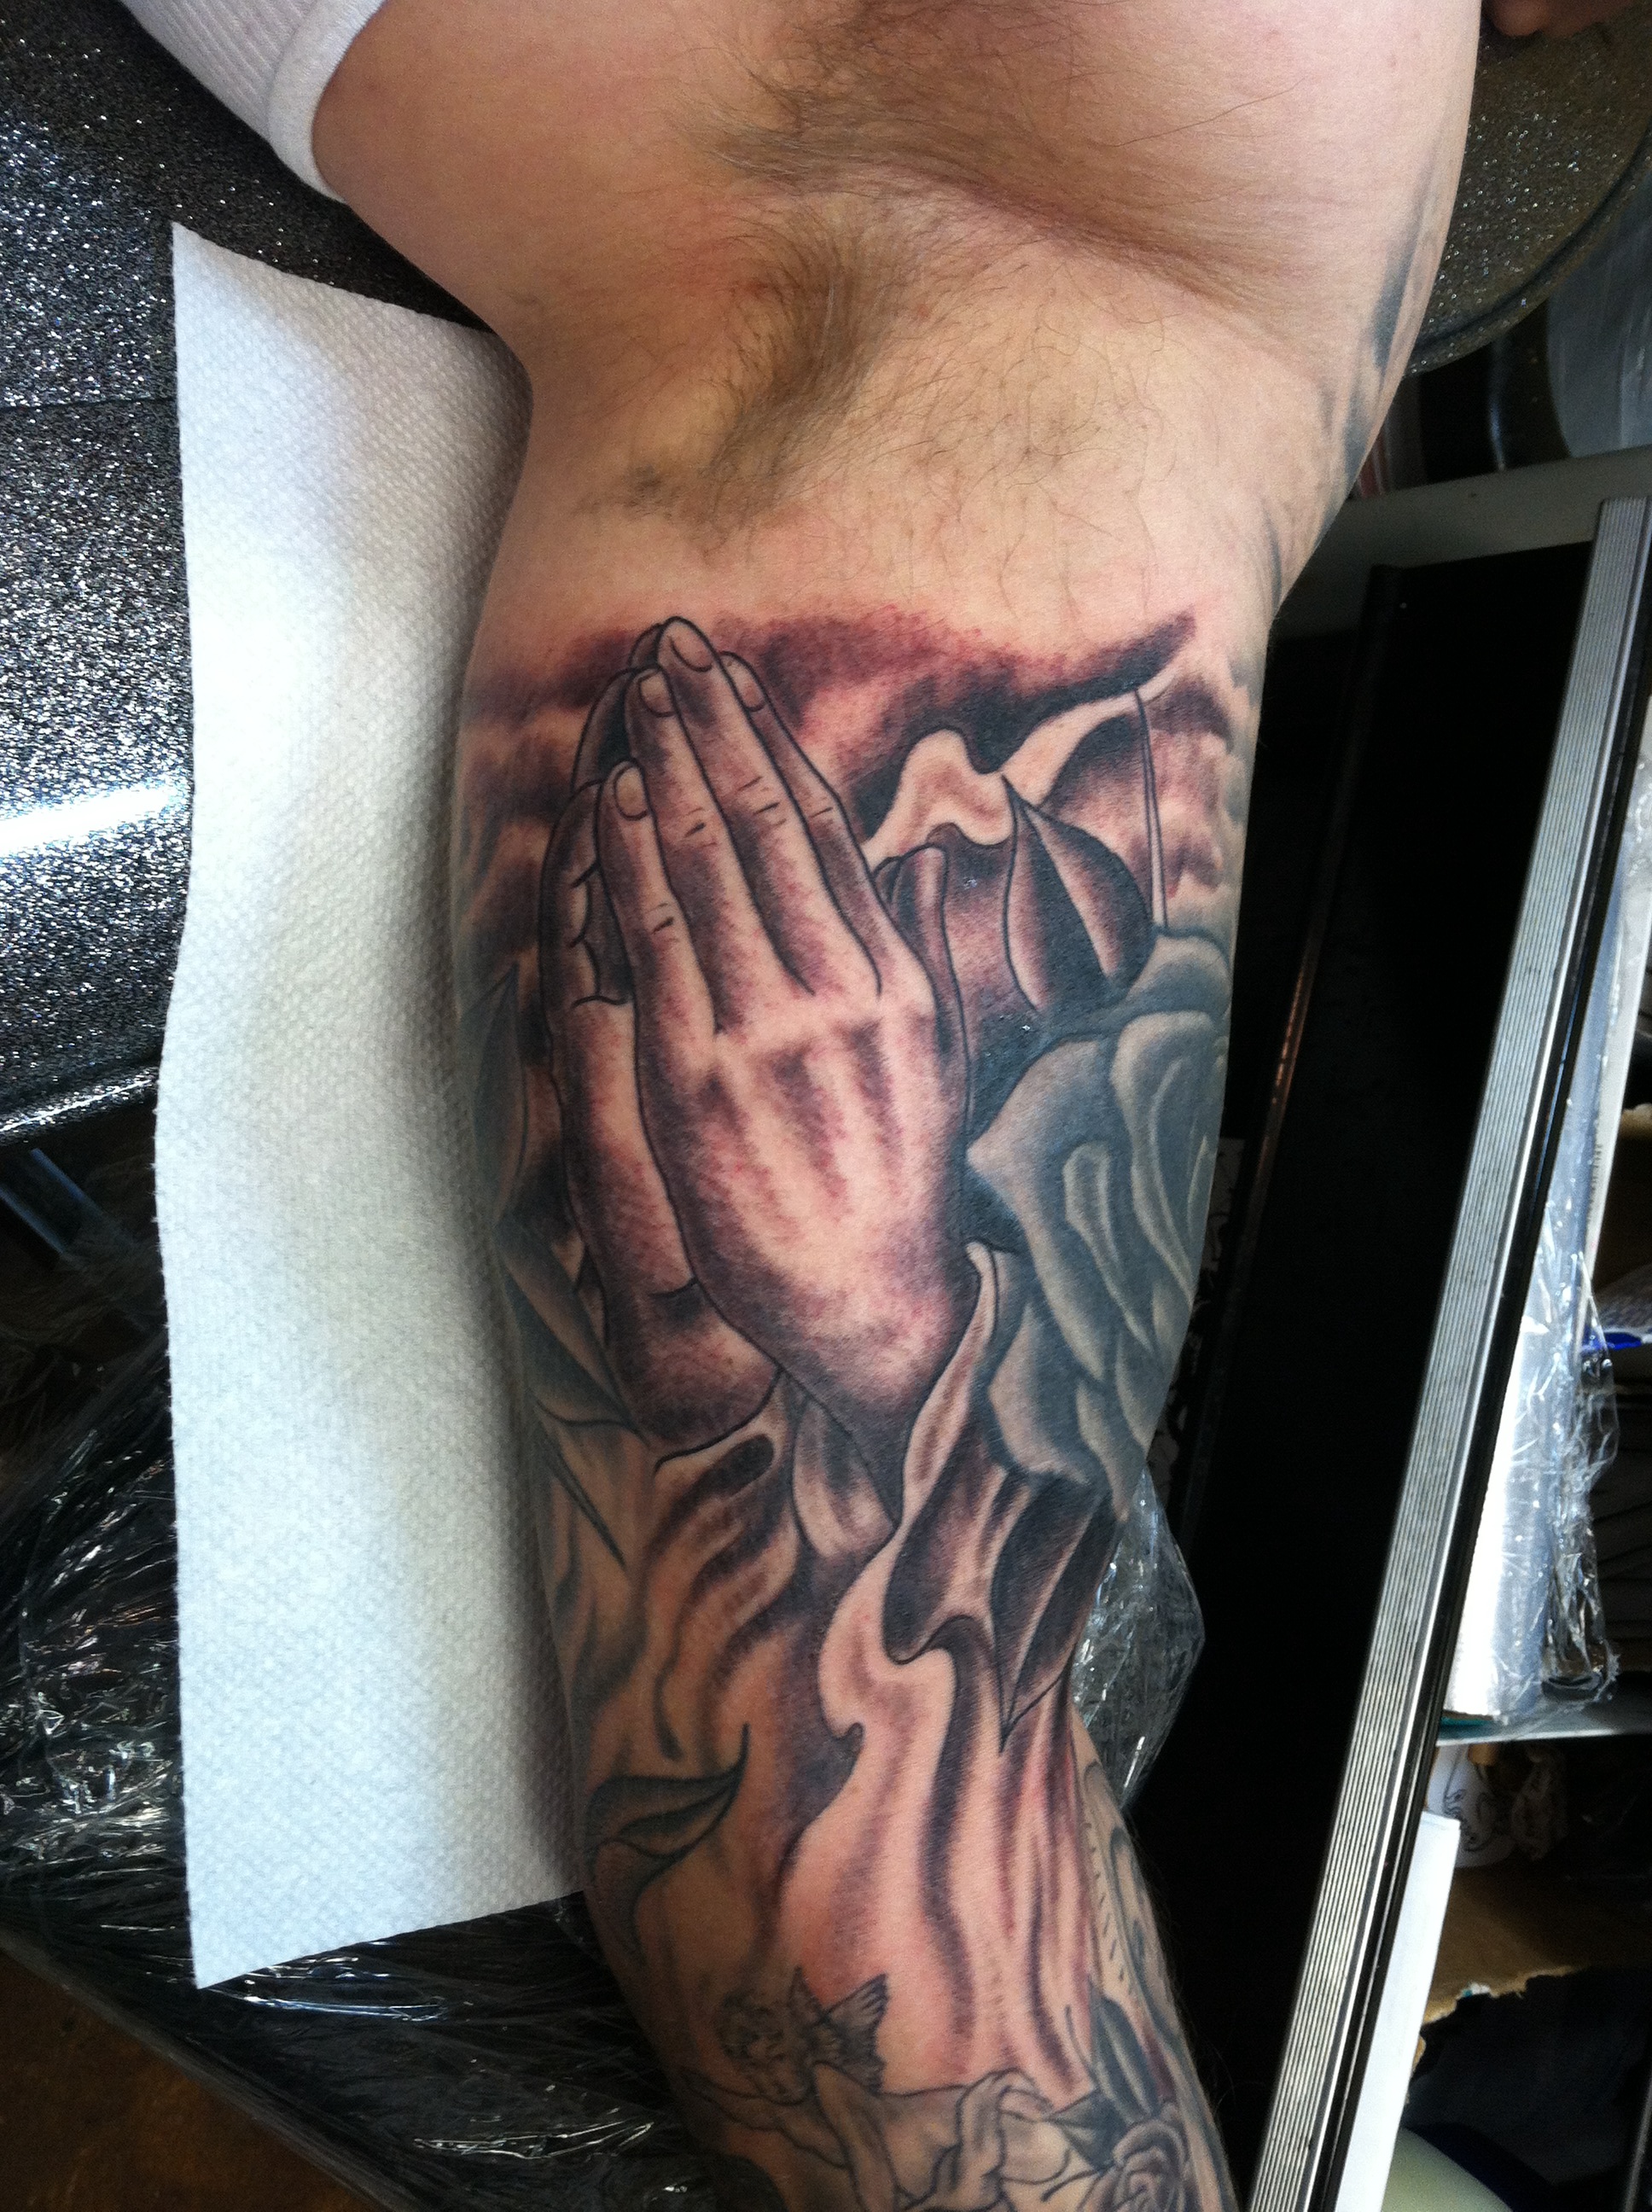 custom traditional black and grey inner arm traditional praying hands religious sleeve tattoo by david meek in tucson arizona at fast lane tattoo with kingpin tattoo supply